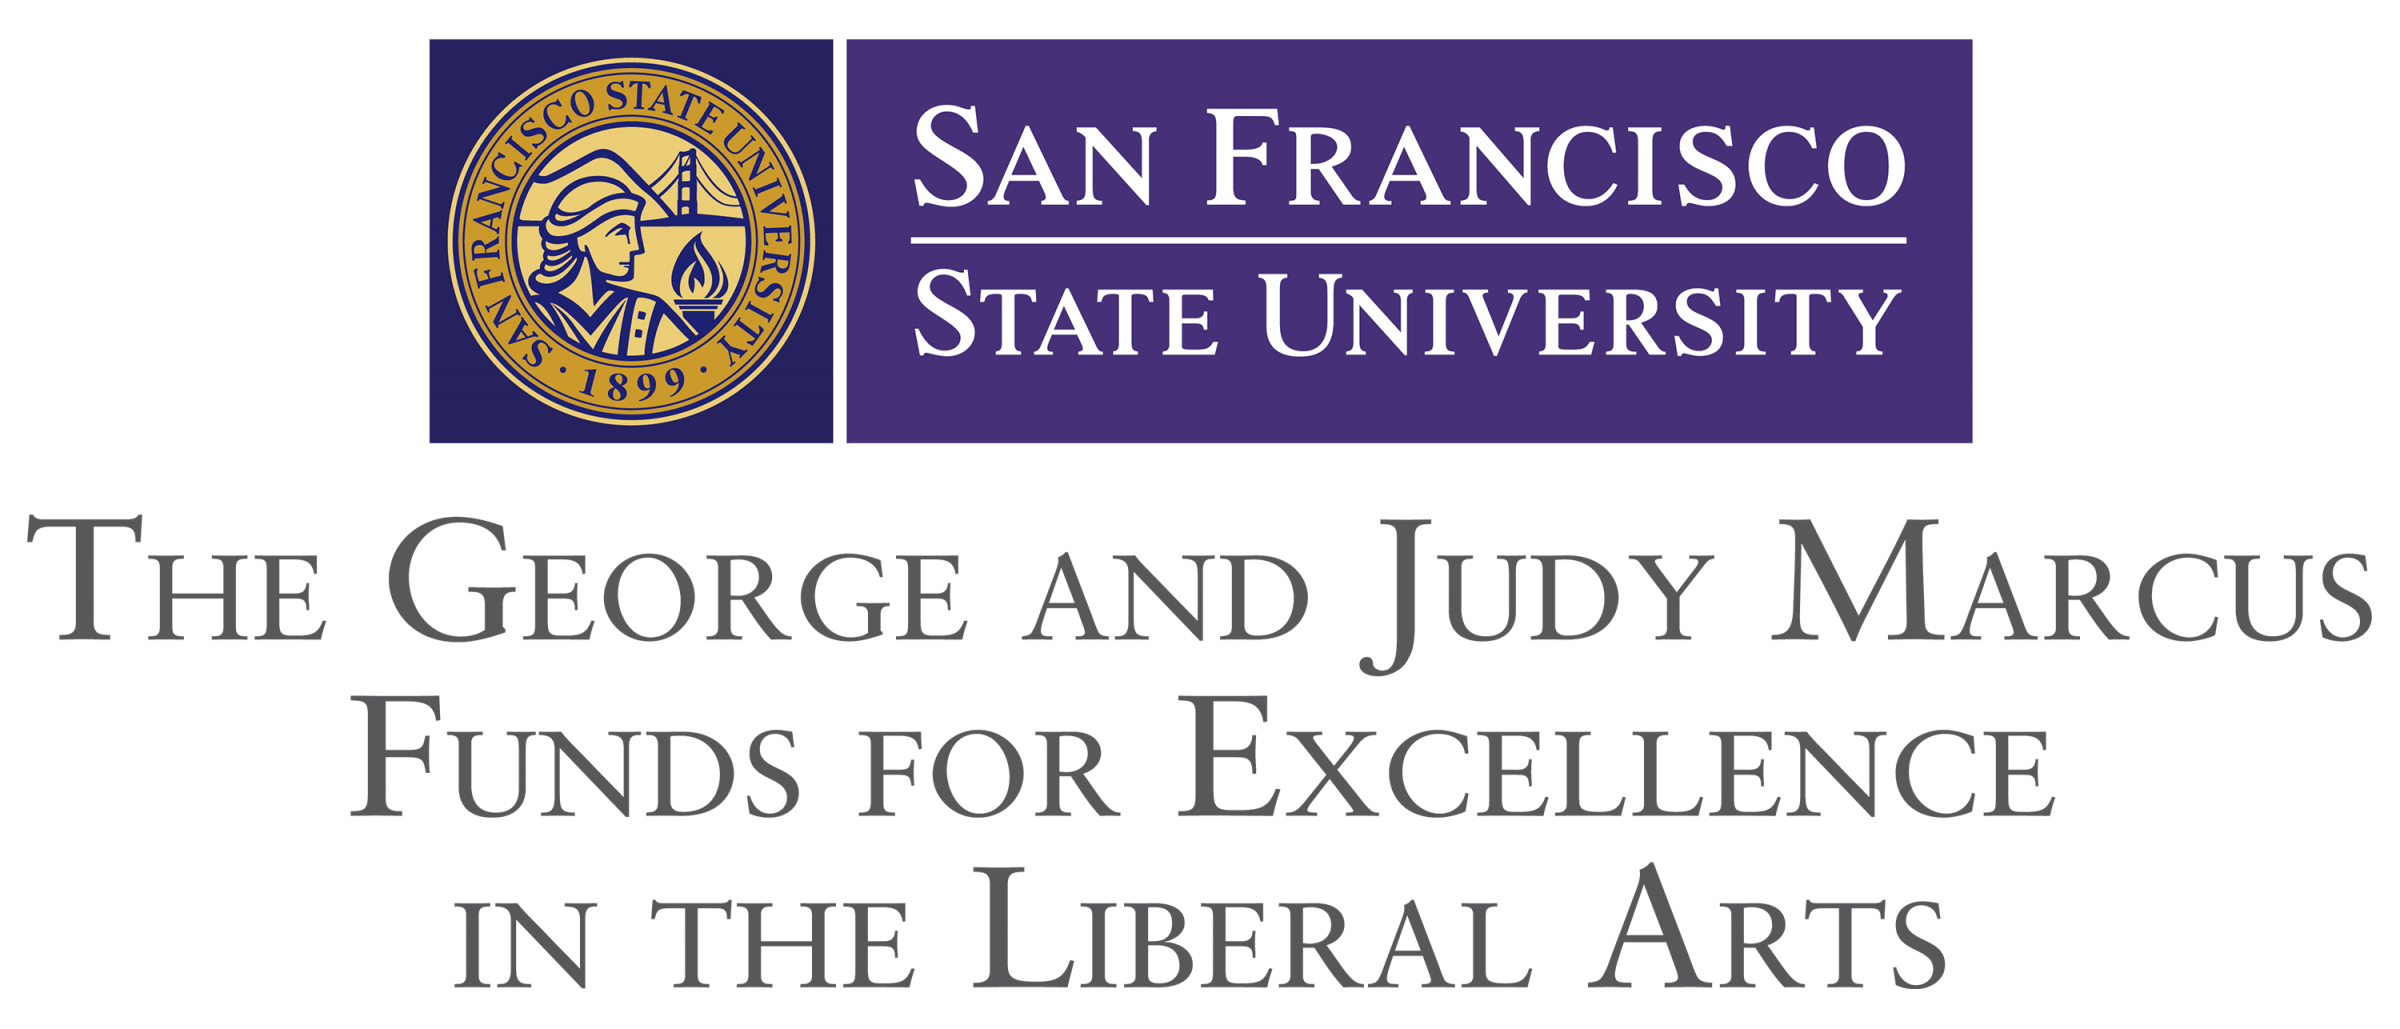 The George and Judy Marcus Fund for Excellence in the Liberal Arts